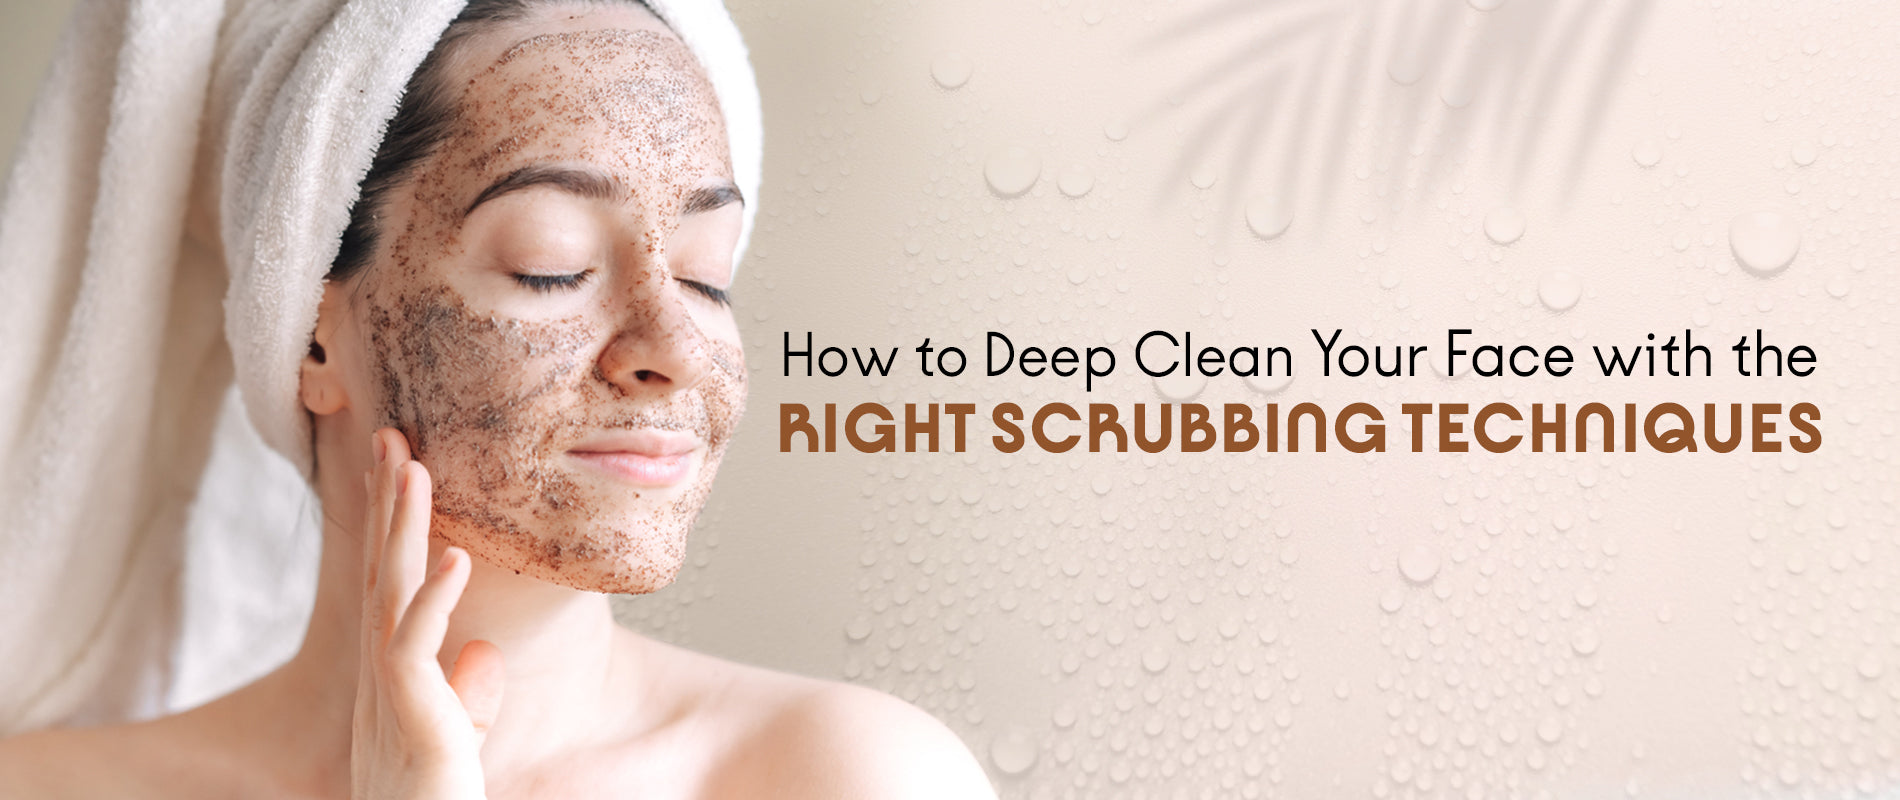 How to deep clean your face with the right scrubbing techniques?